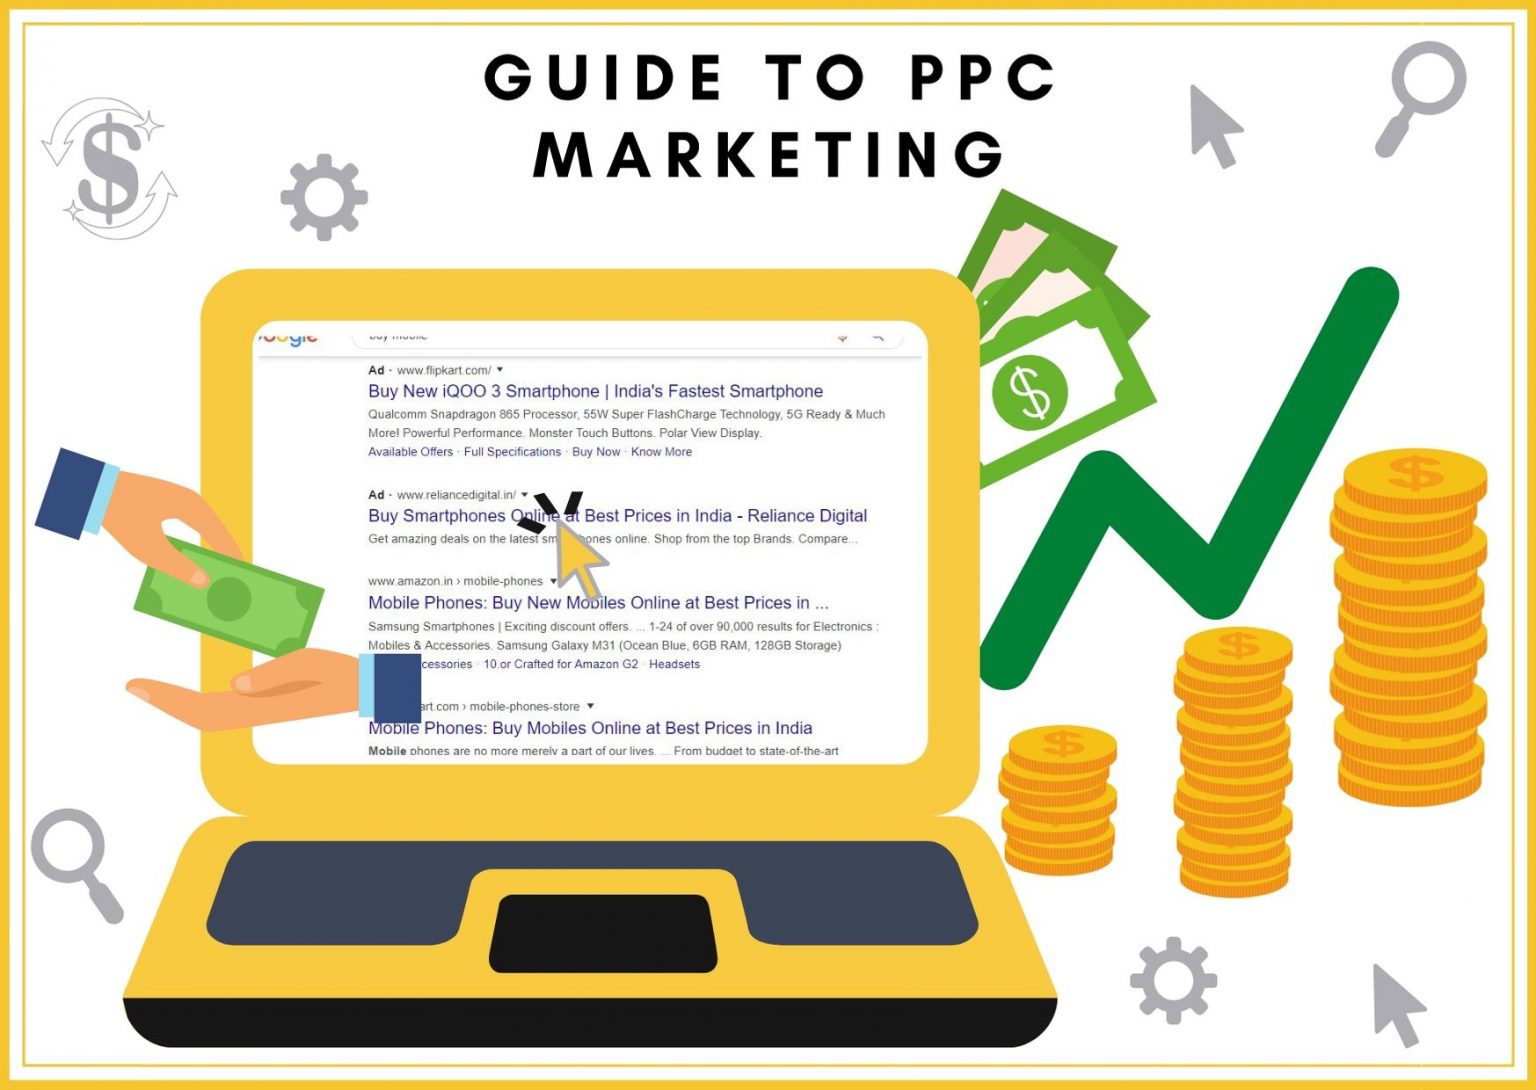 ppc management for small business